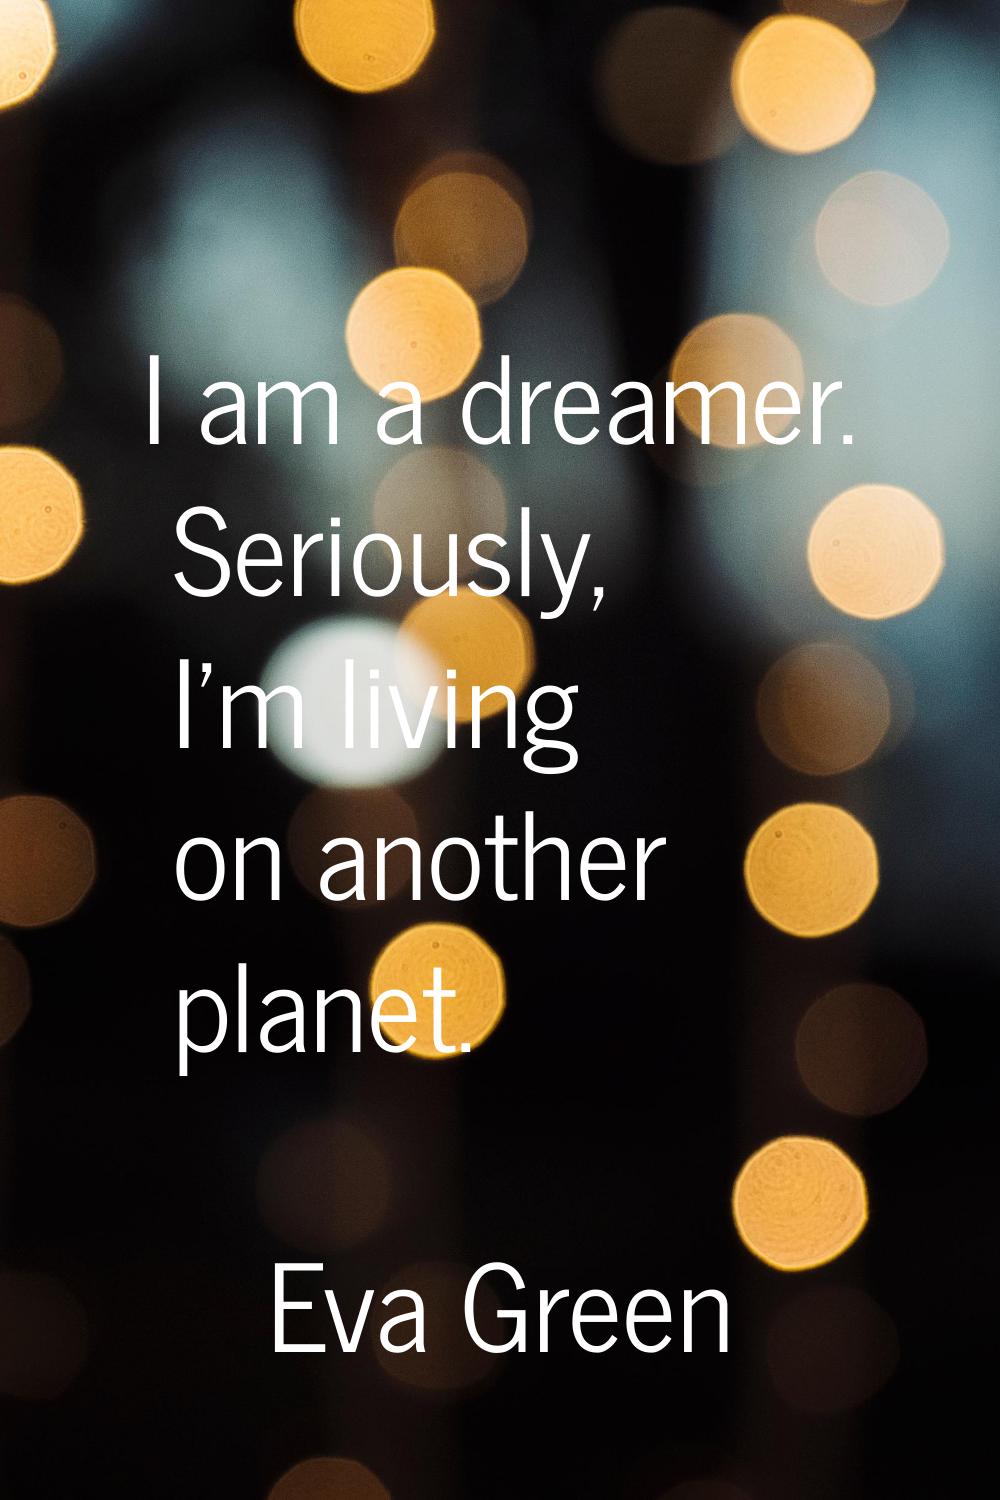 I am a dreamer. Seriously, I'm living on another planet.